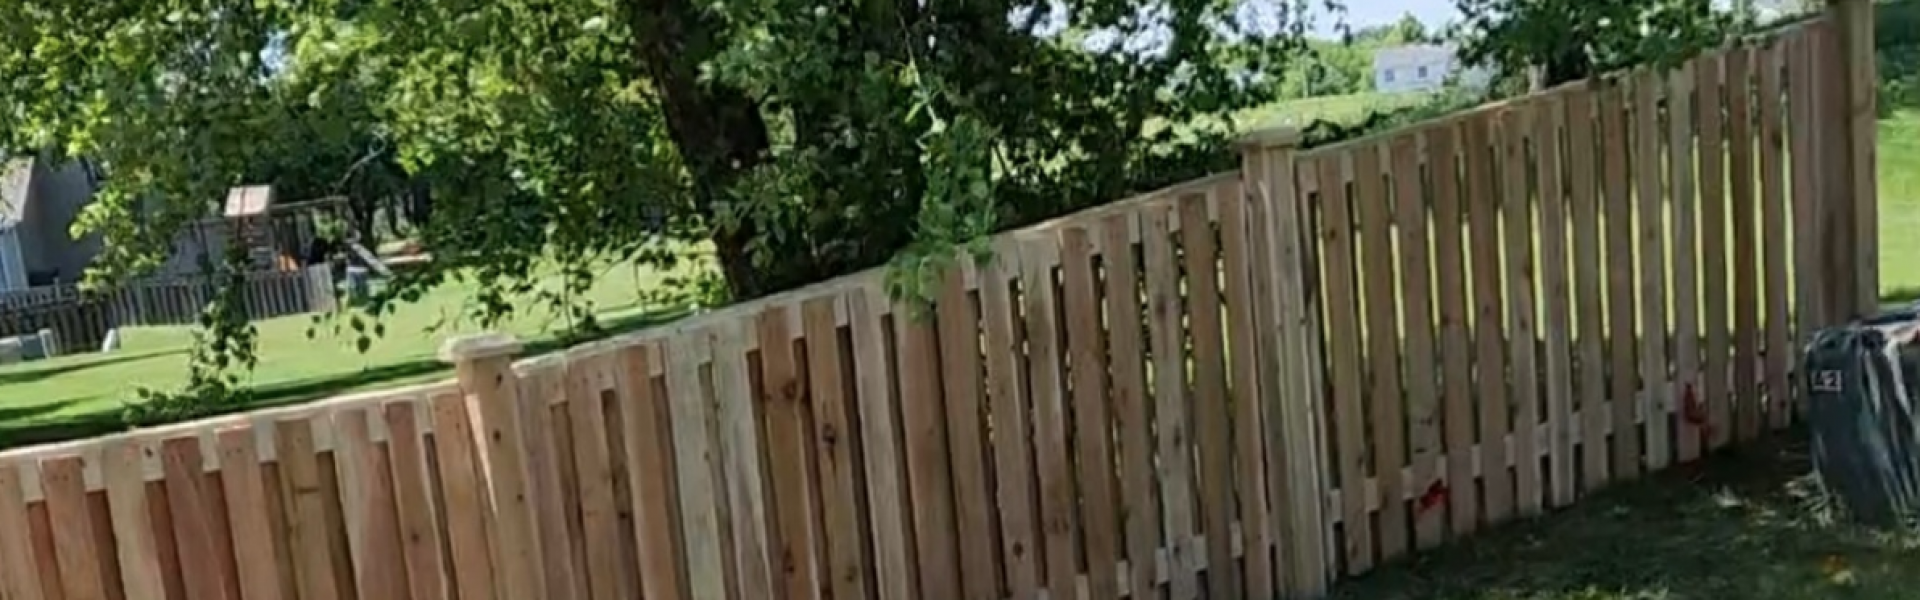 Fence on a Slope